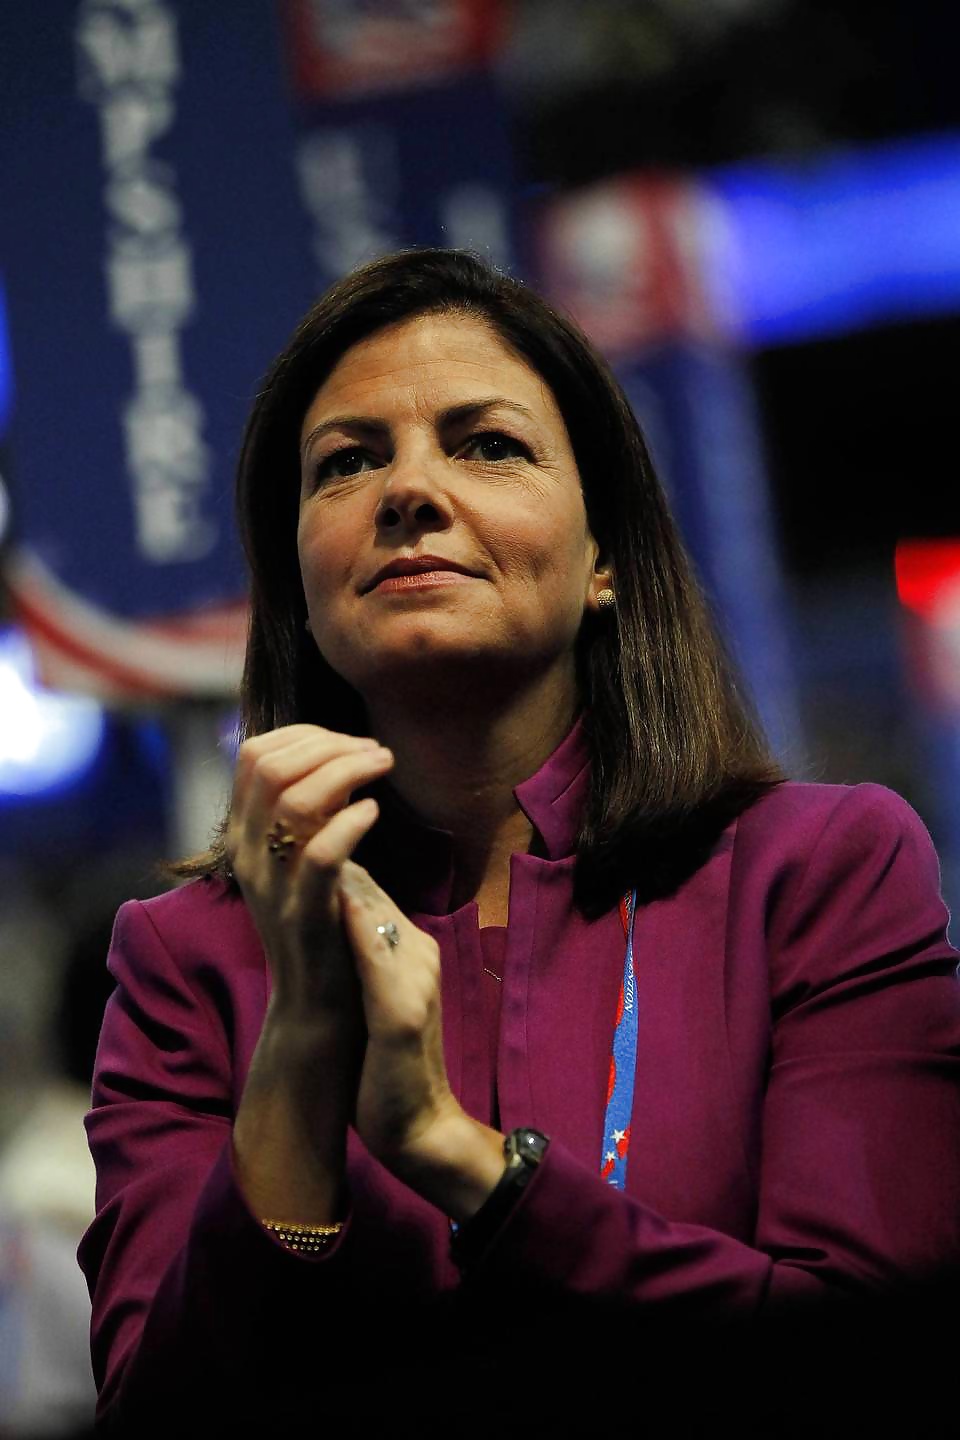 It's so good jerking off to conservative Kelly Ayotte #35039568